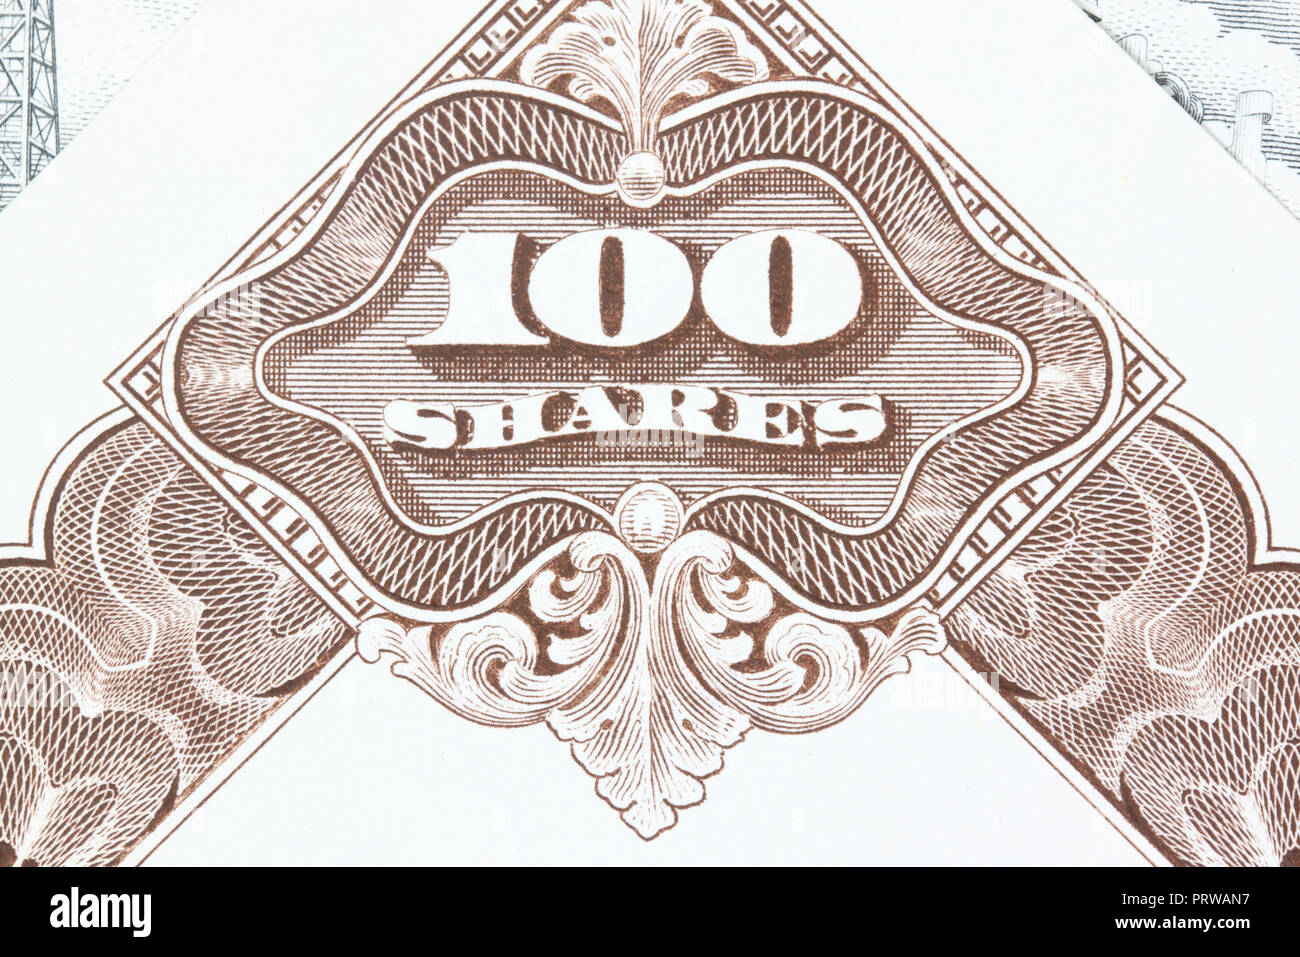 100 shares. Old stock share certificate. Vintage scripophily objects. Stock Photo